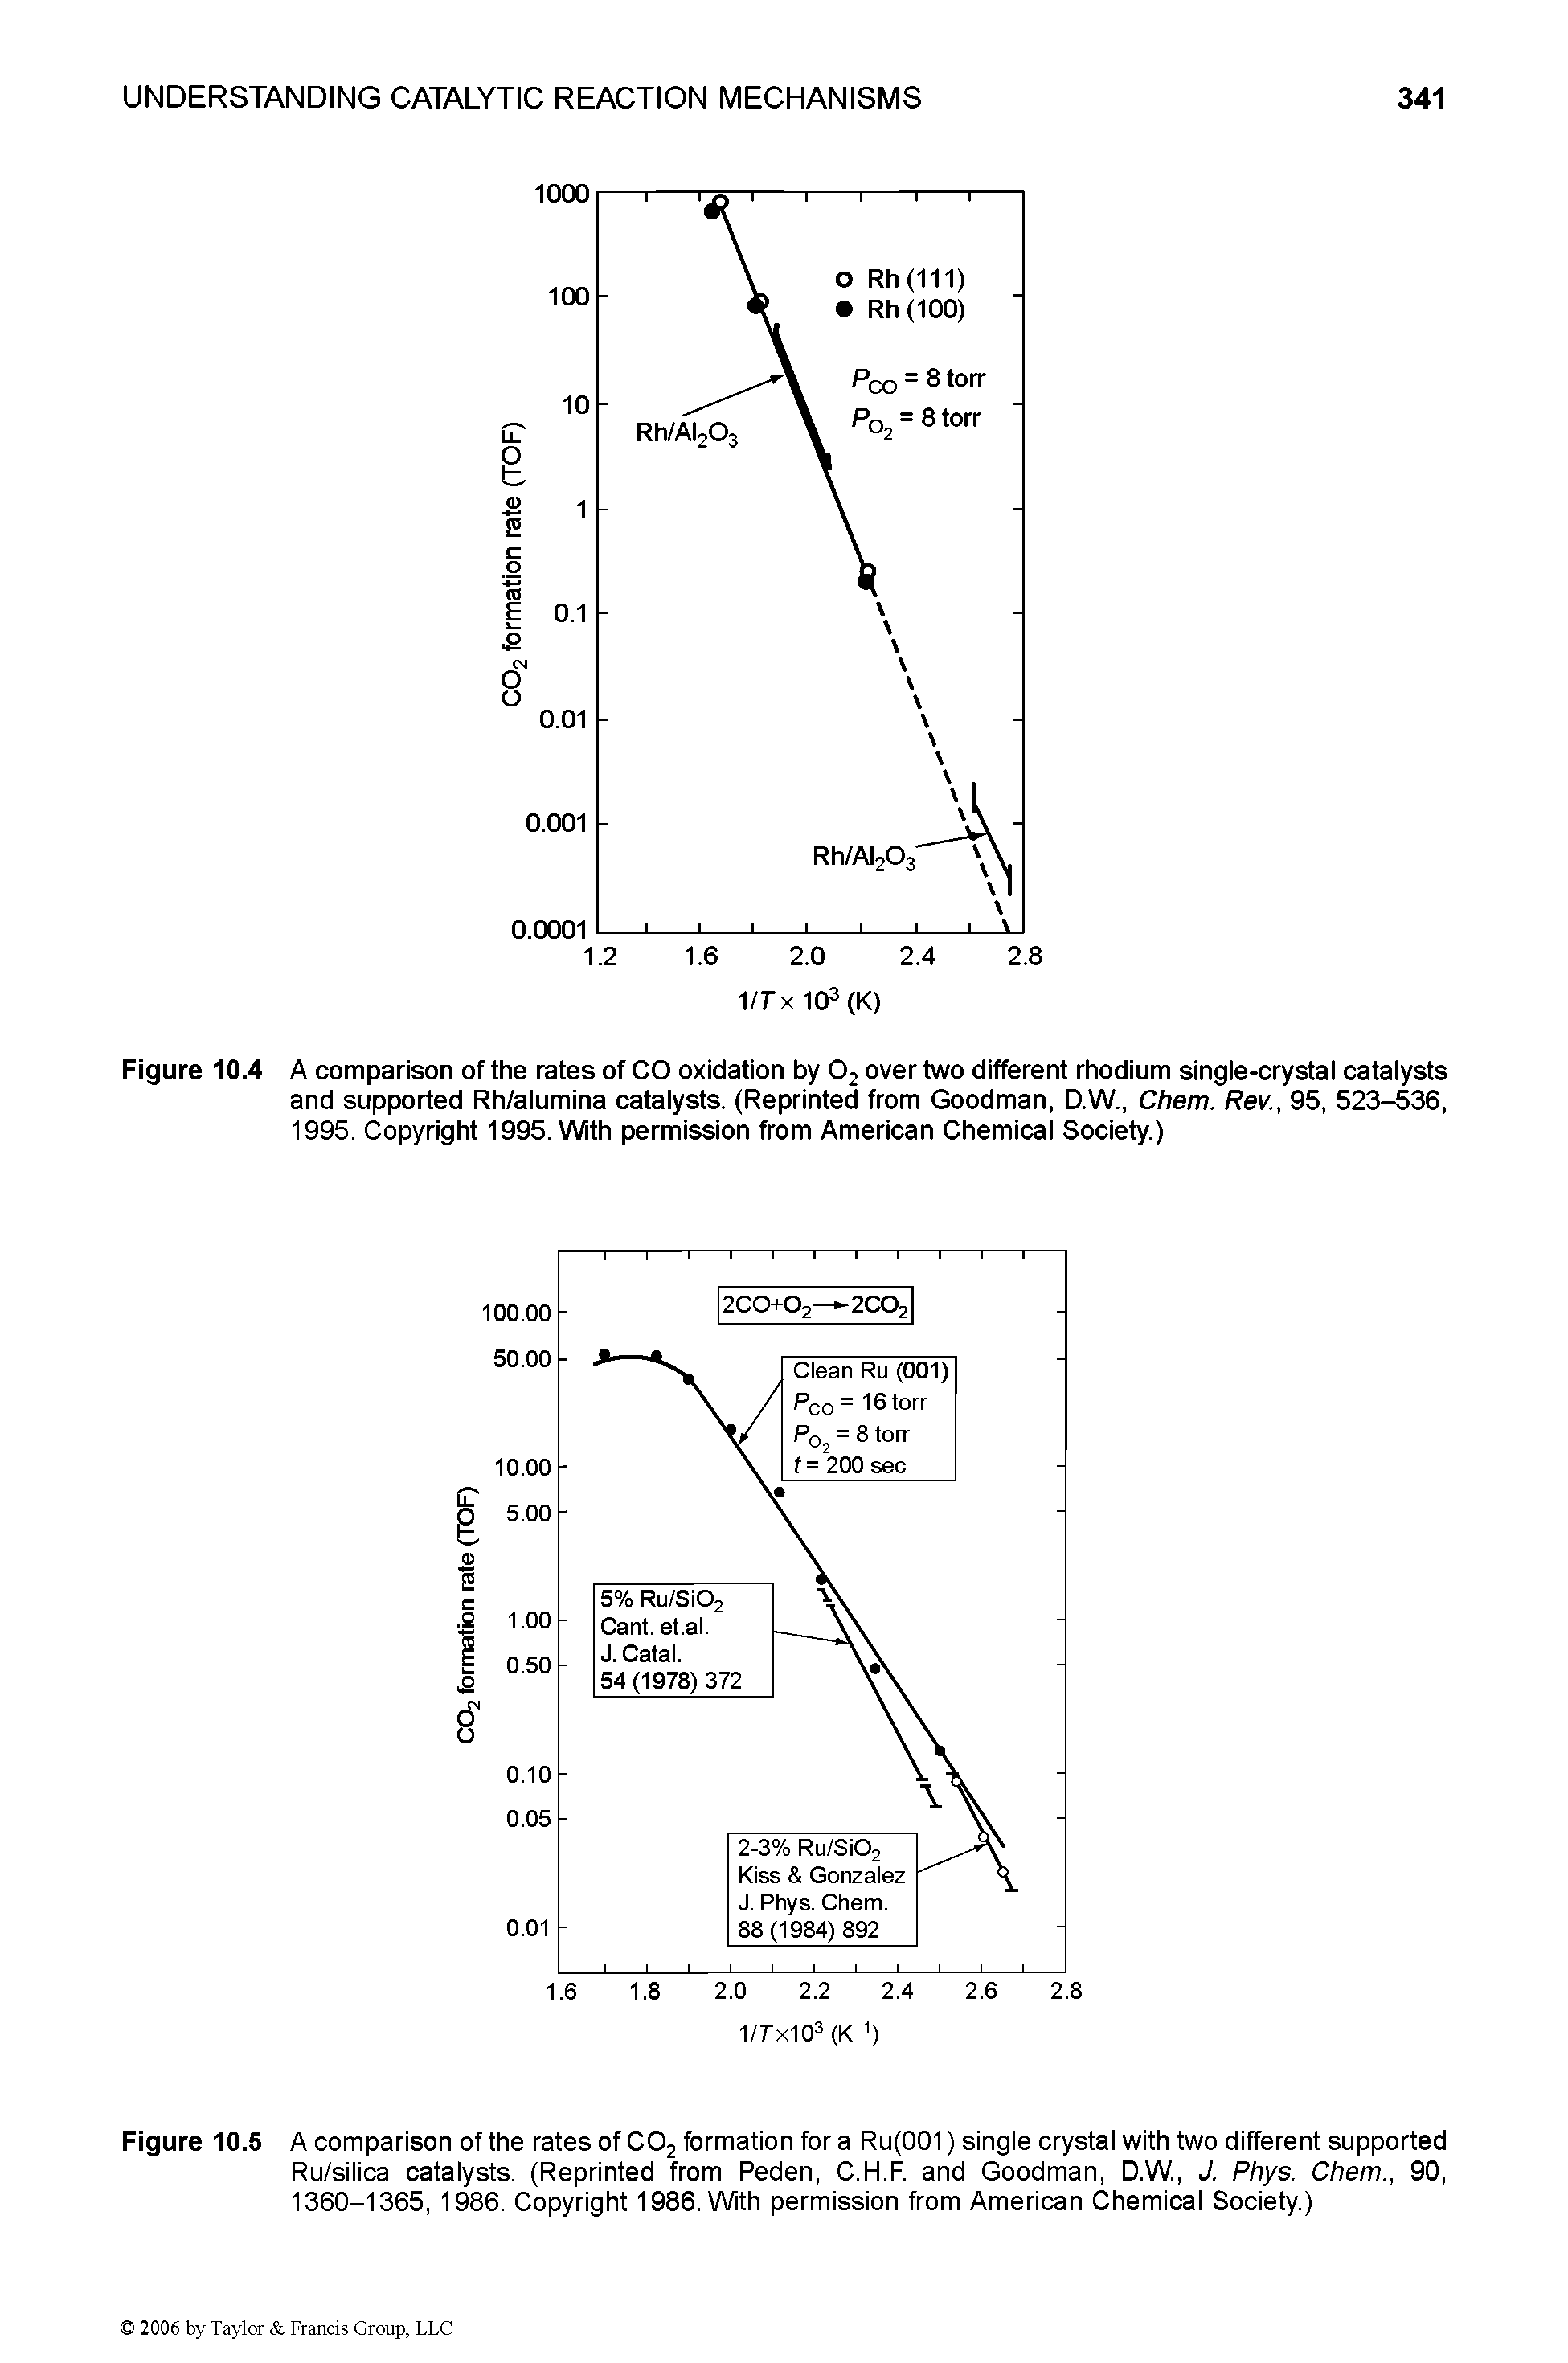 Figure 10.4 A comparison of the rates of CO oxidation by 02 over two different rhodium single-crystal catalysts and supported Rh/alumina catalysts. (Reprinted from Goodman, D.W., Chem. Rev., 95, 523-536, 1995. Copyright 1995. With permission from American Chemical Society.)...